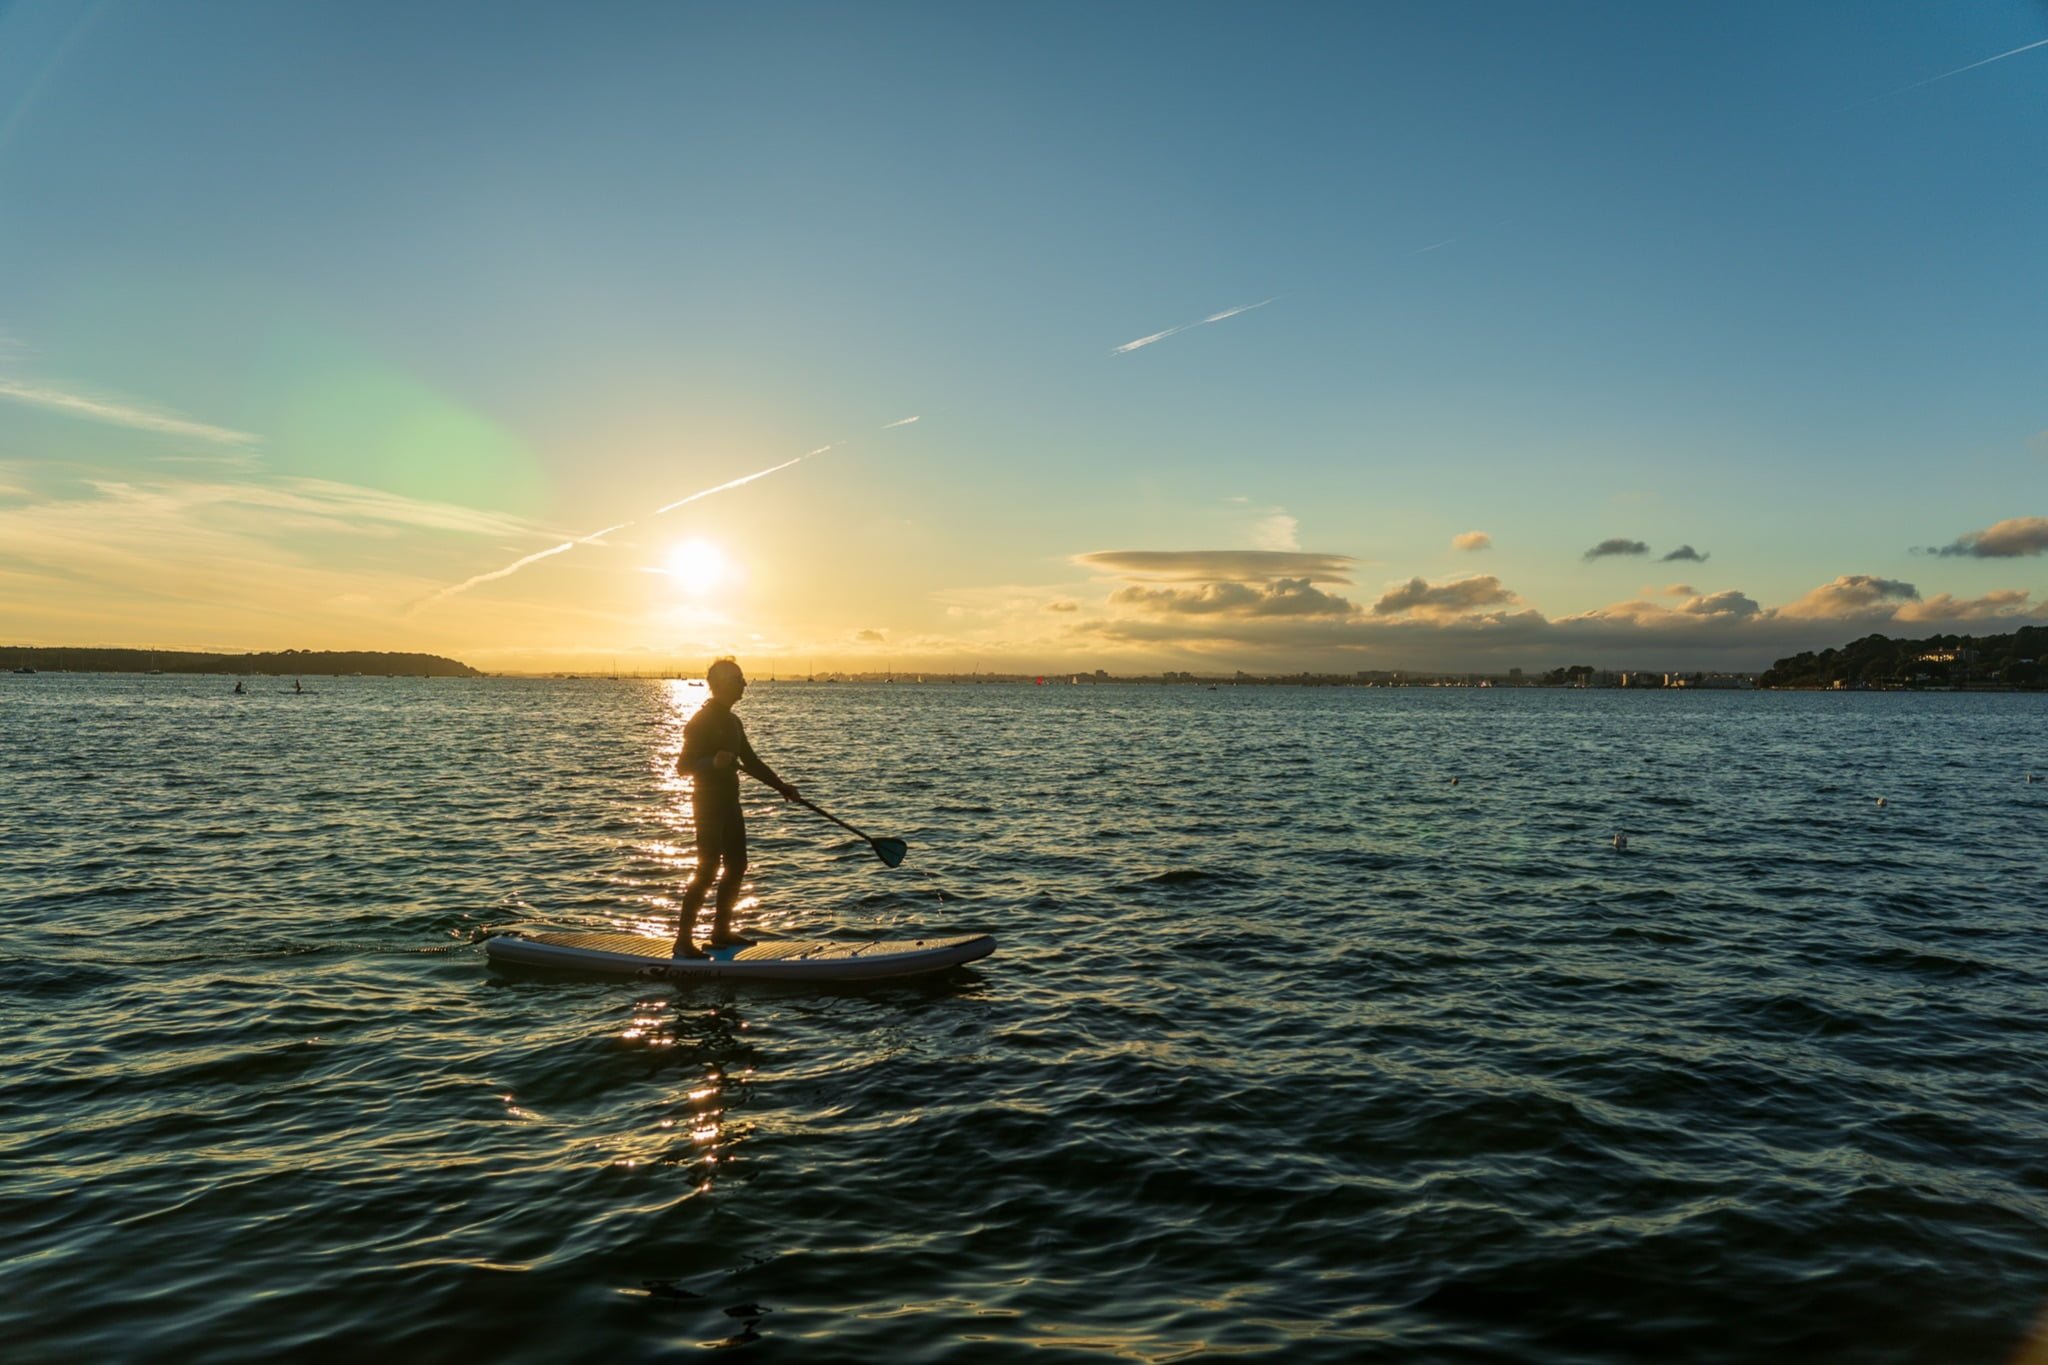 a person doing stand-up paddleboarding